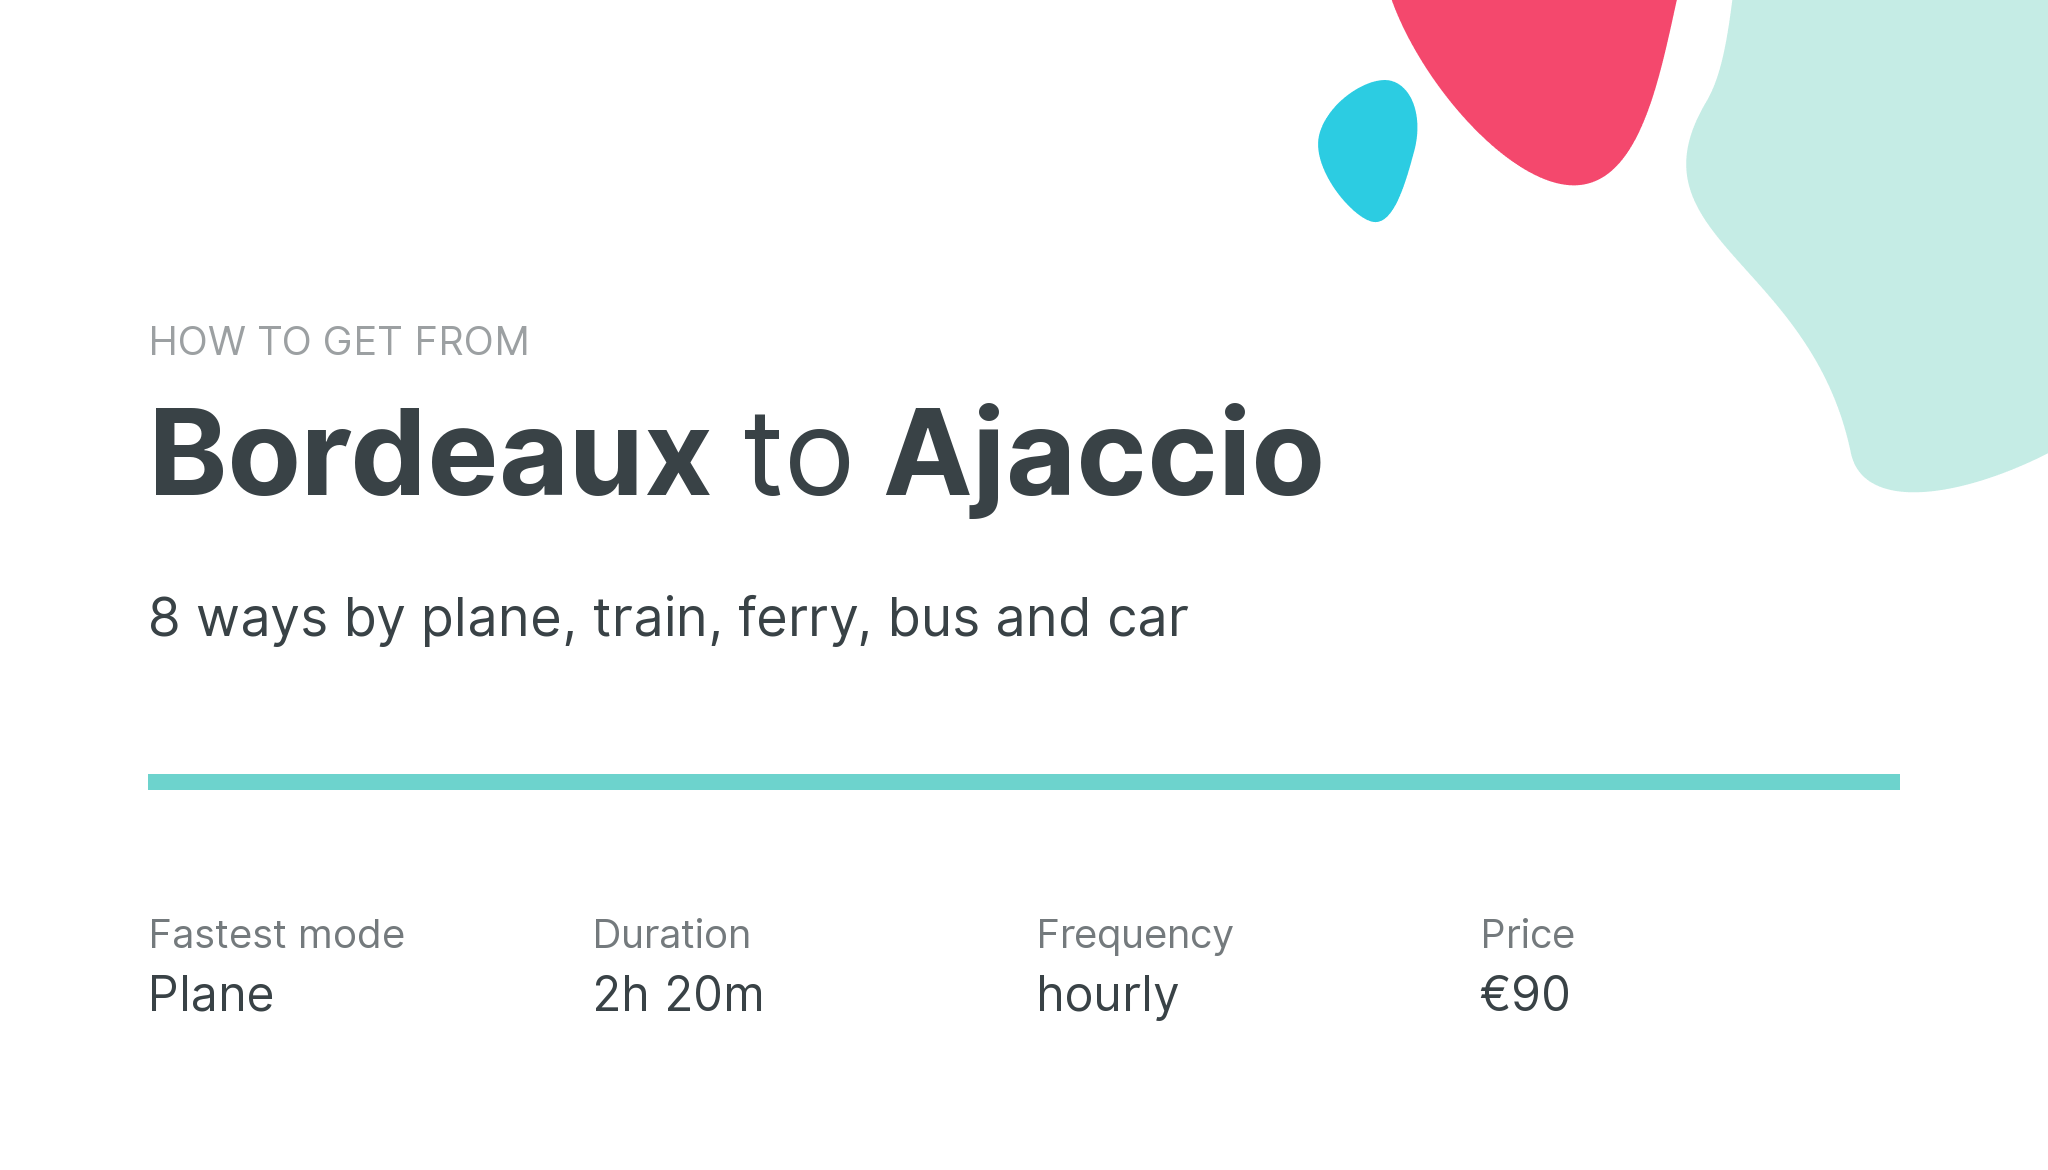 How do I get from Bordeaux to Ajaccio